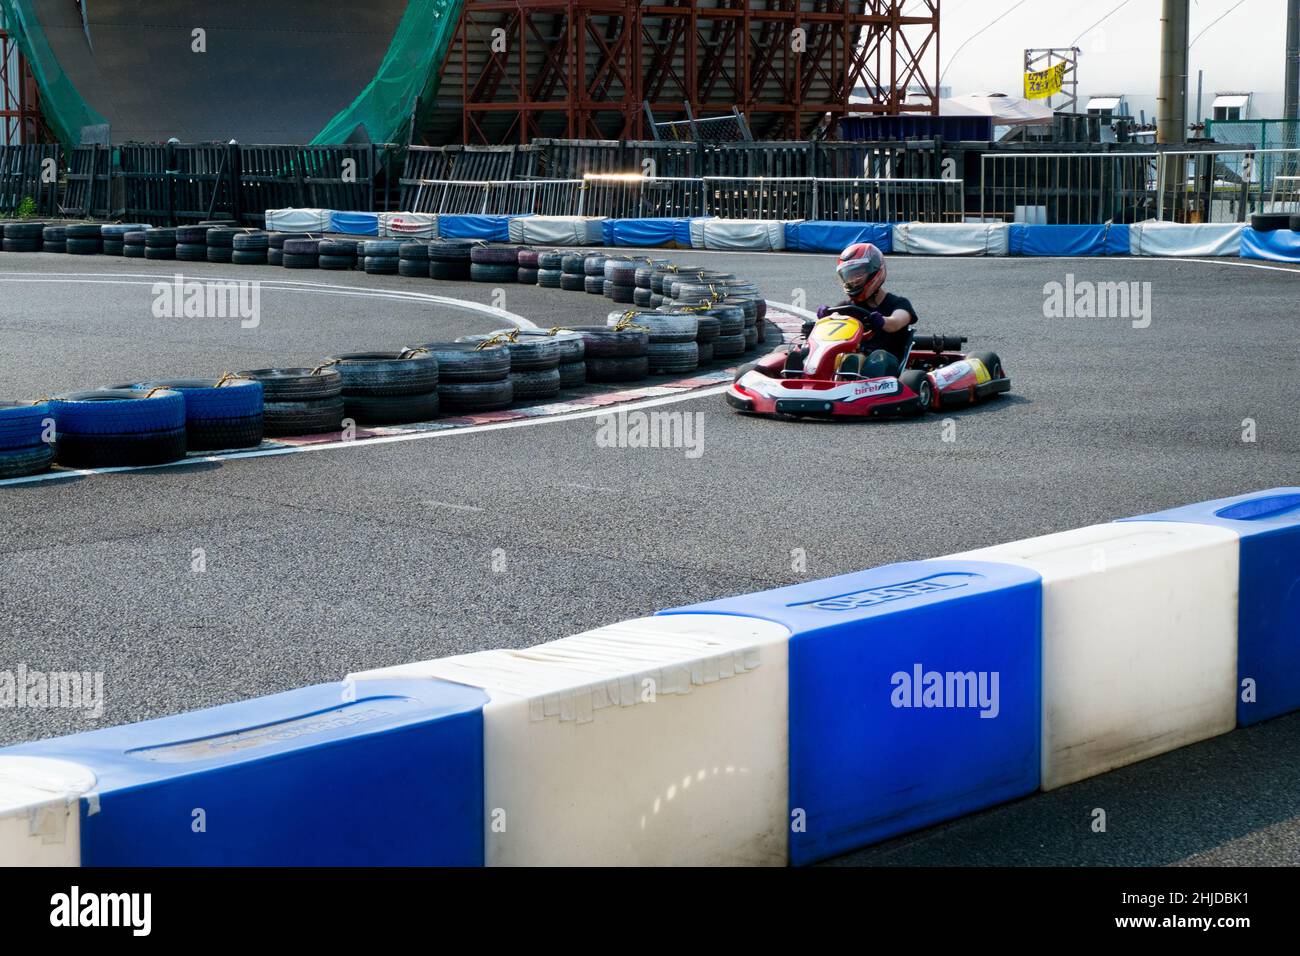 Rental go cart in a corner of track coming towards camera in Tokyo Stock Photo